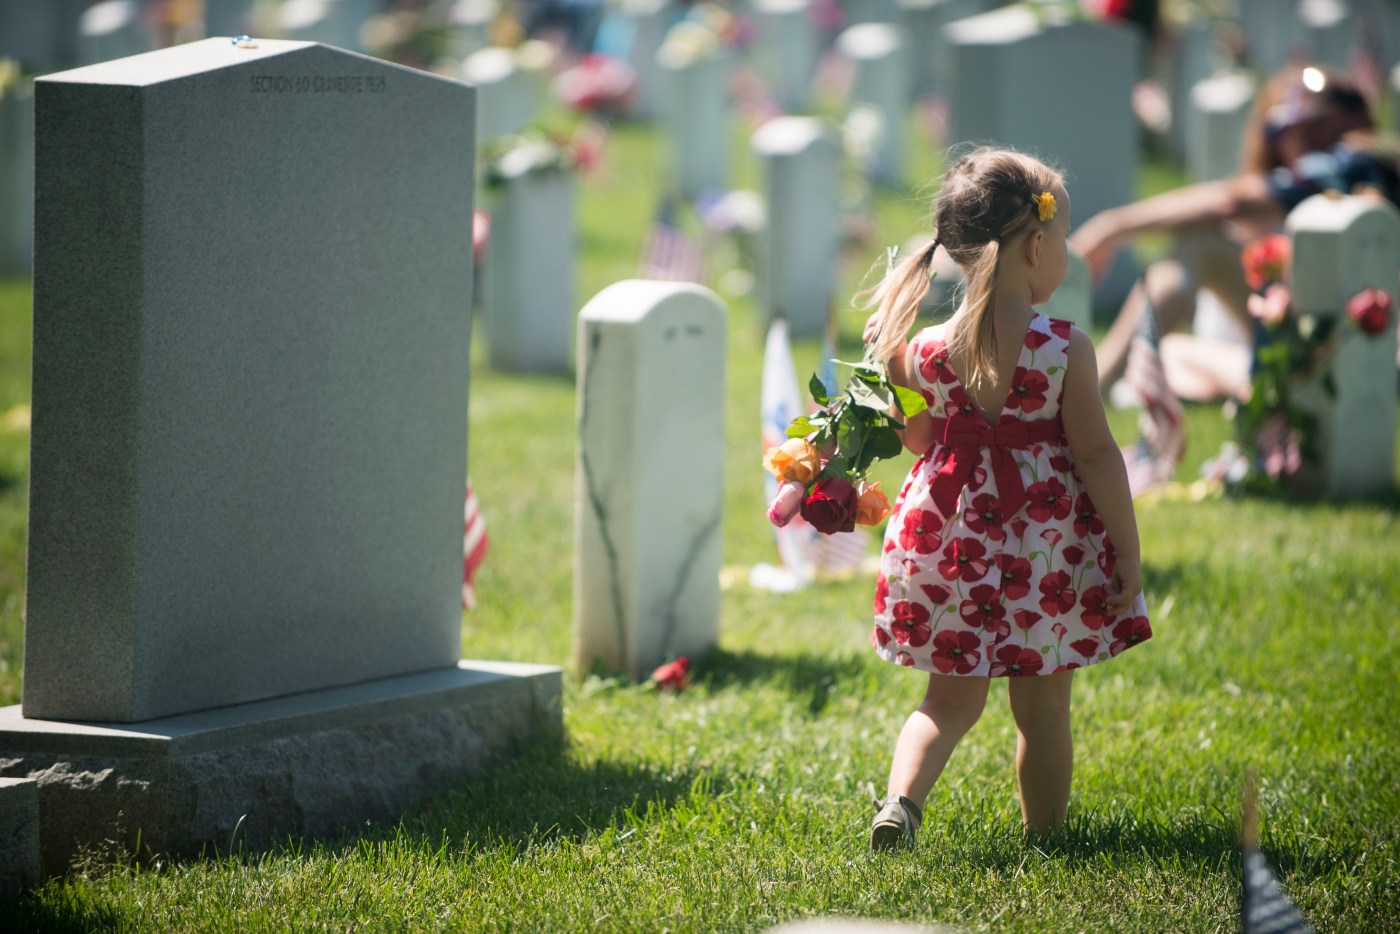 Image of child walking with flowers during Memorial Day